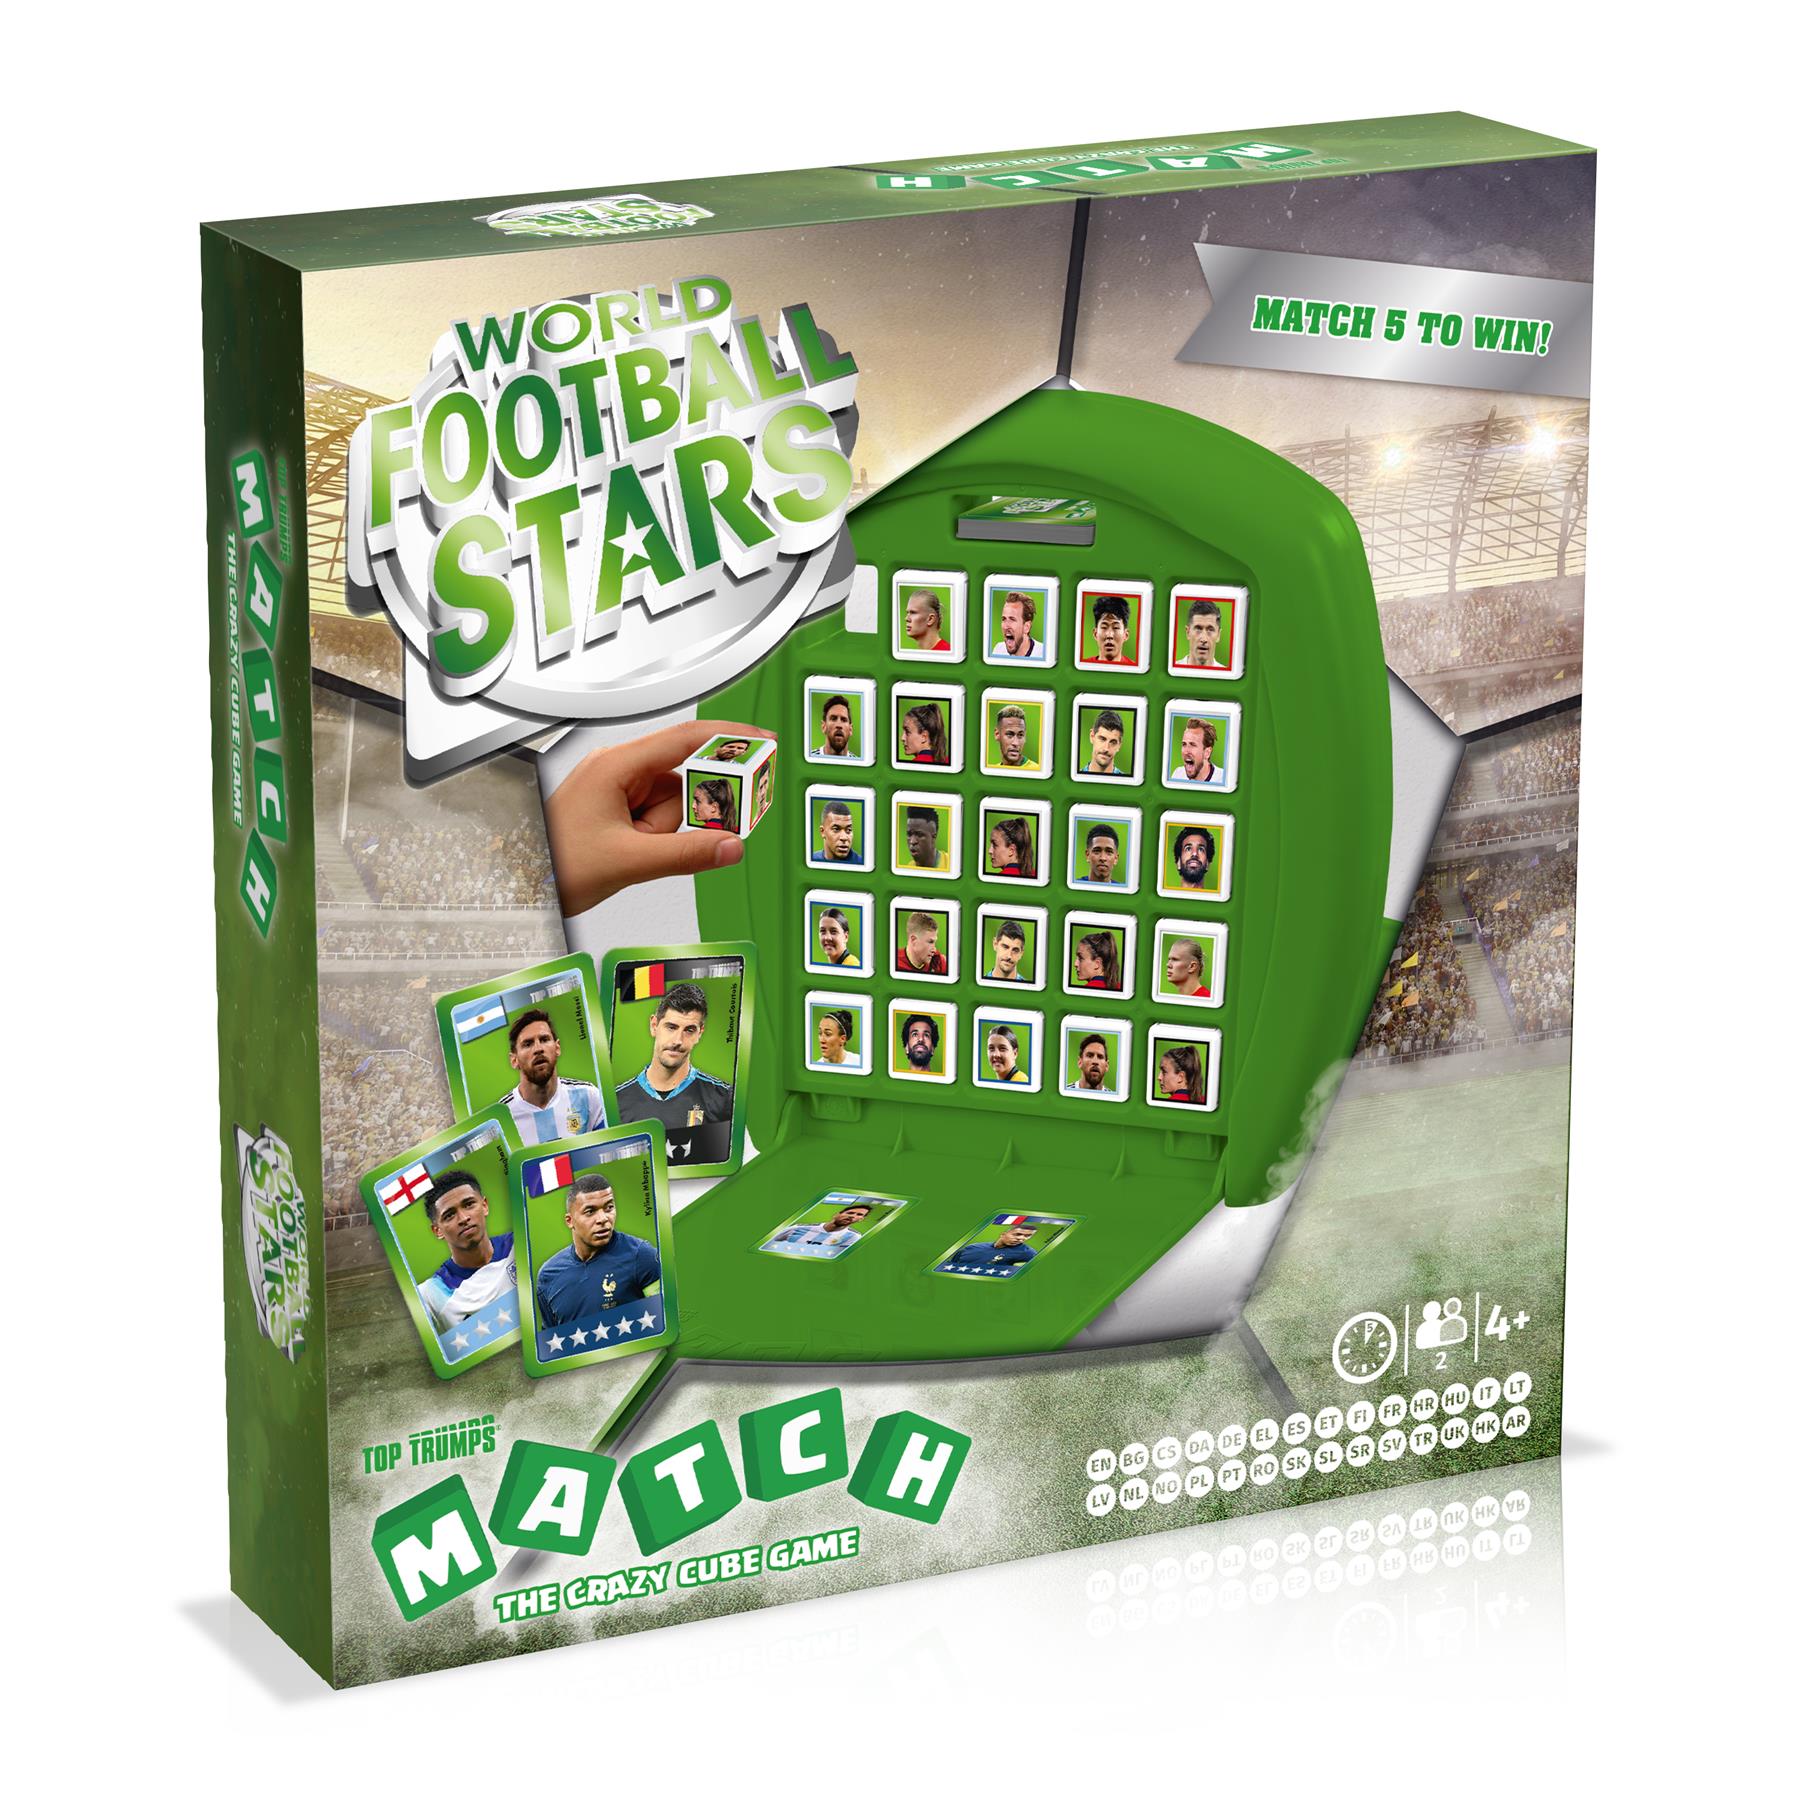 World Football Stars Green Top Trumps Match - The Crazy Cube Game